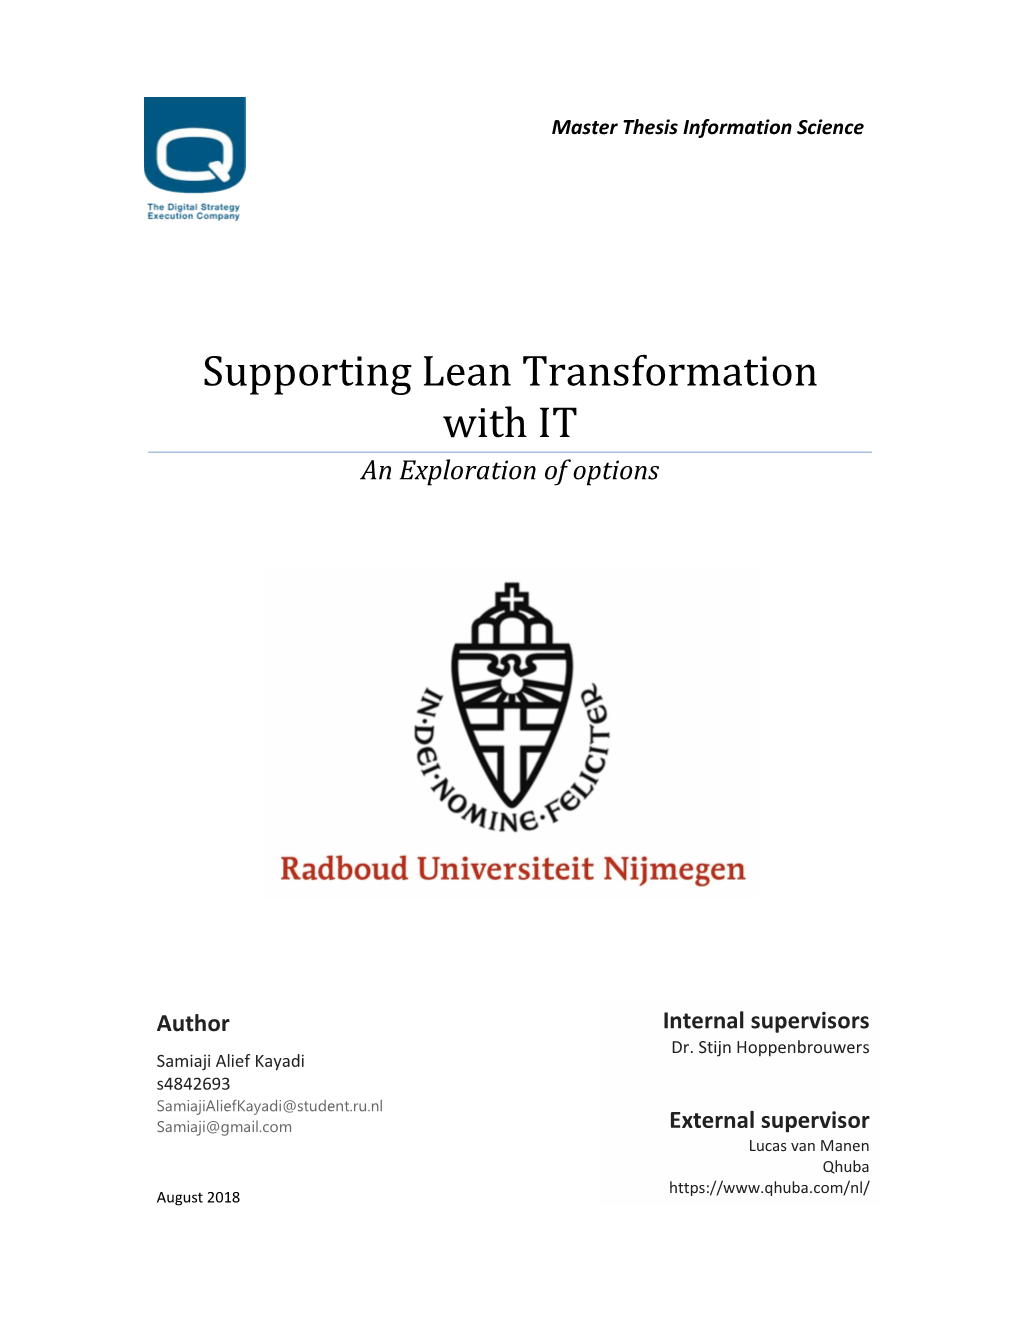 Supporting Lean Transformation with IT an Exploration of Options